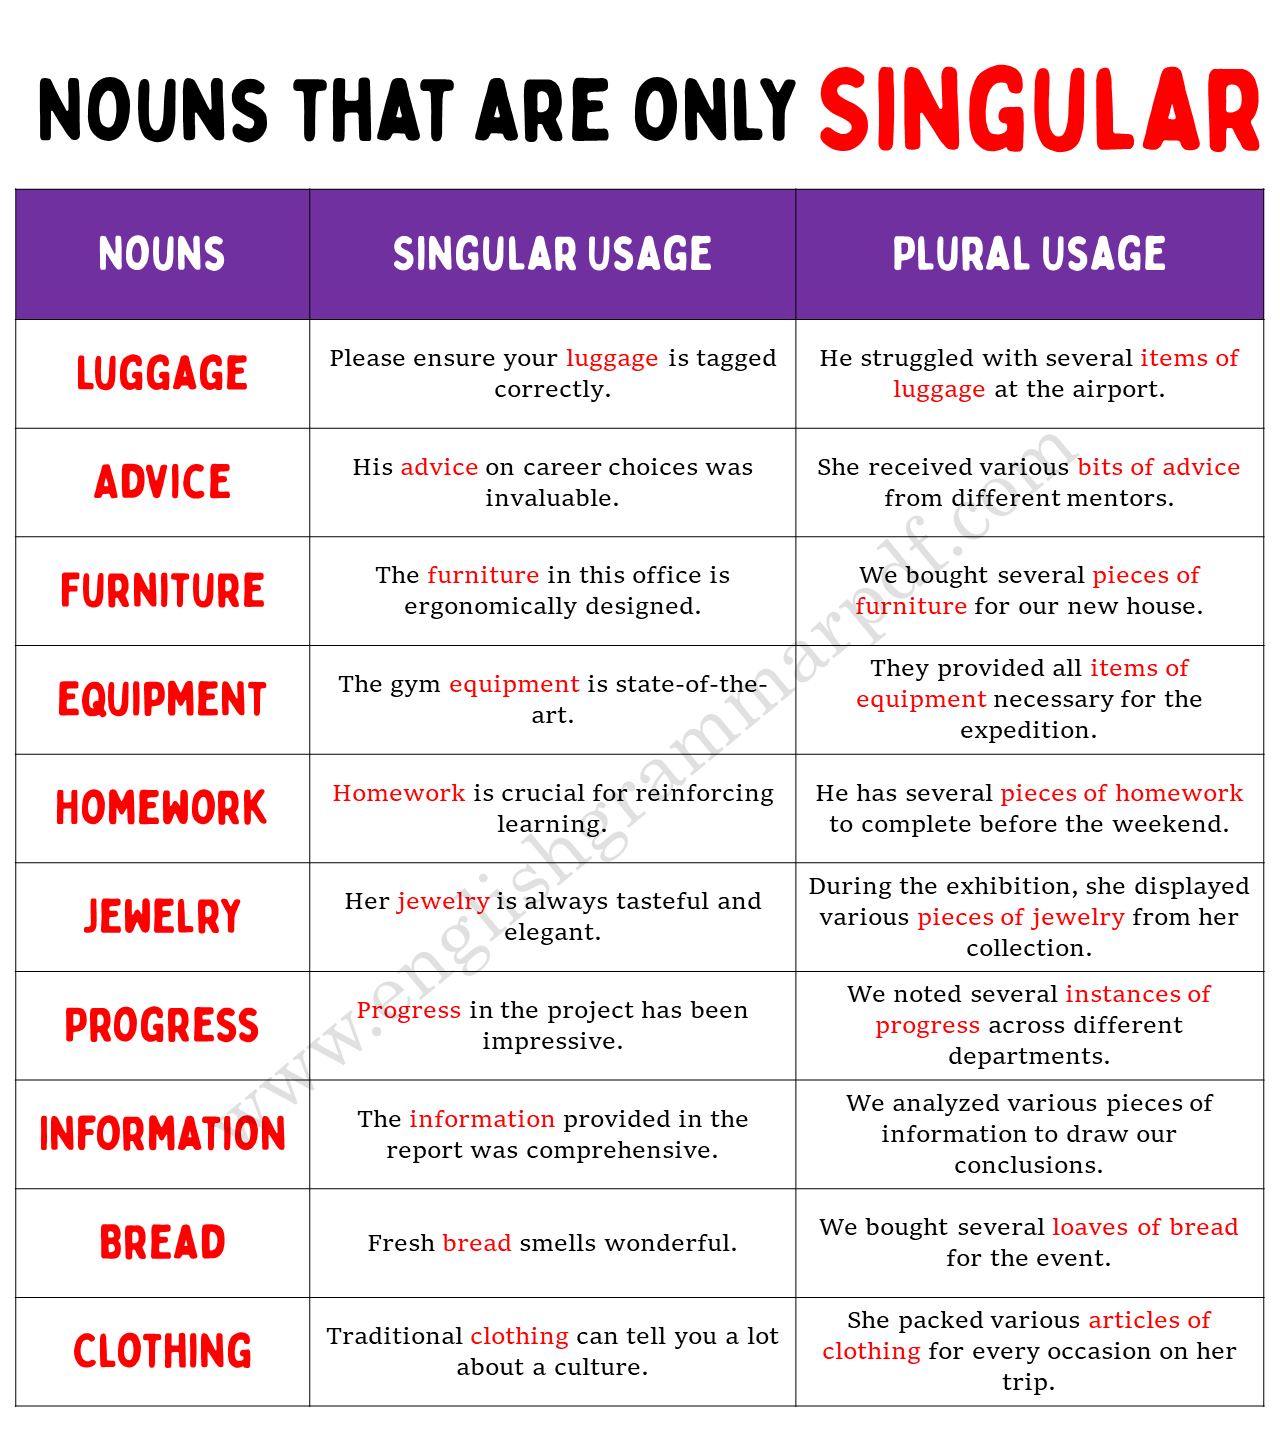 Nouns that are only Singular